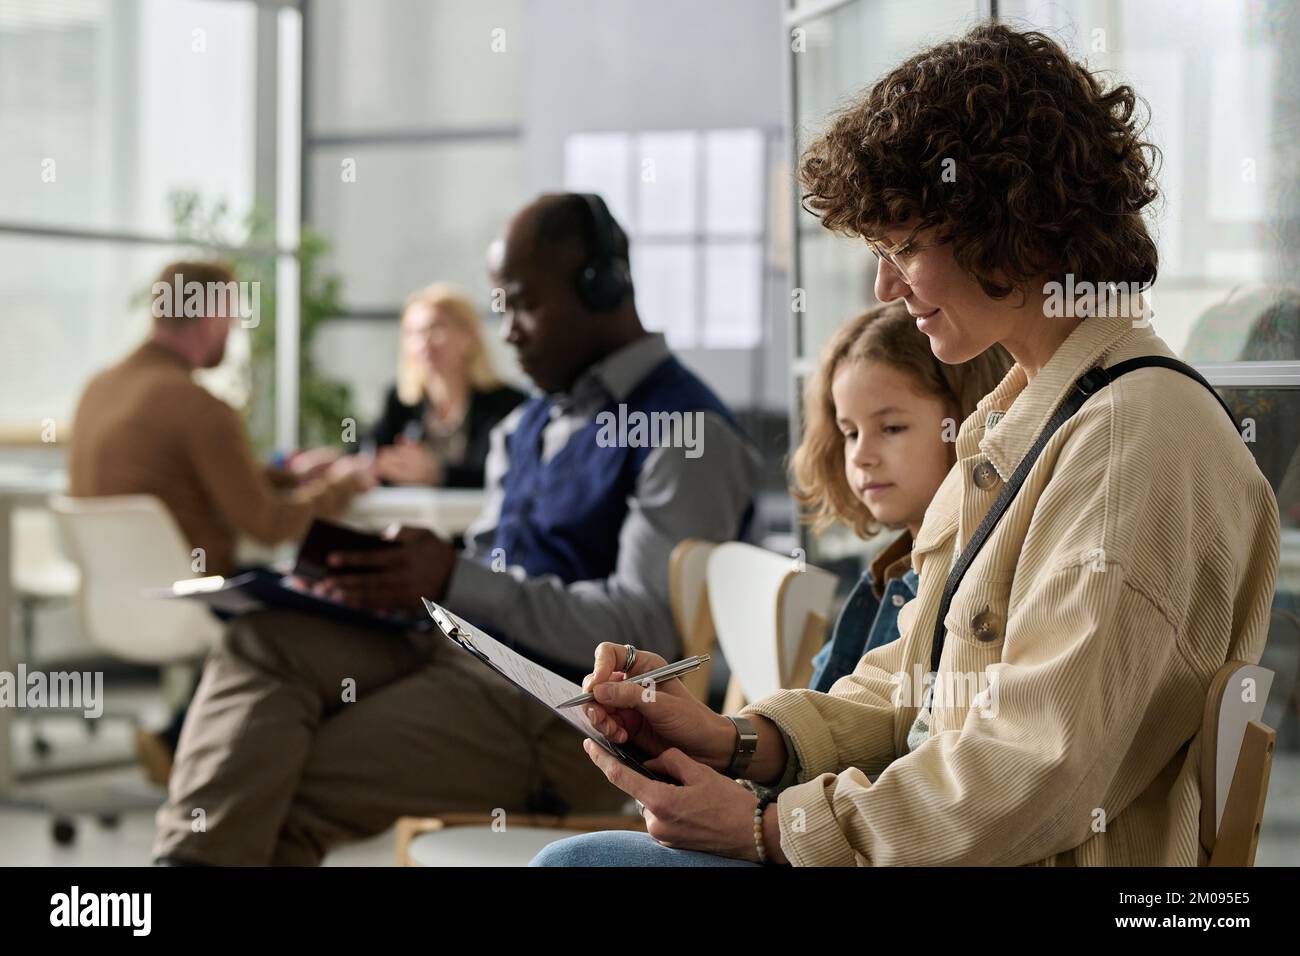 Side view portrait of young mother and daughter filling application forms while waiting in line at immigration office, copy space Stock Photo